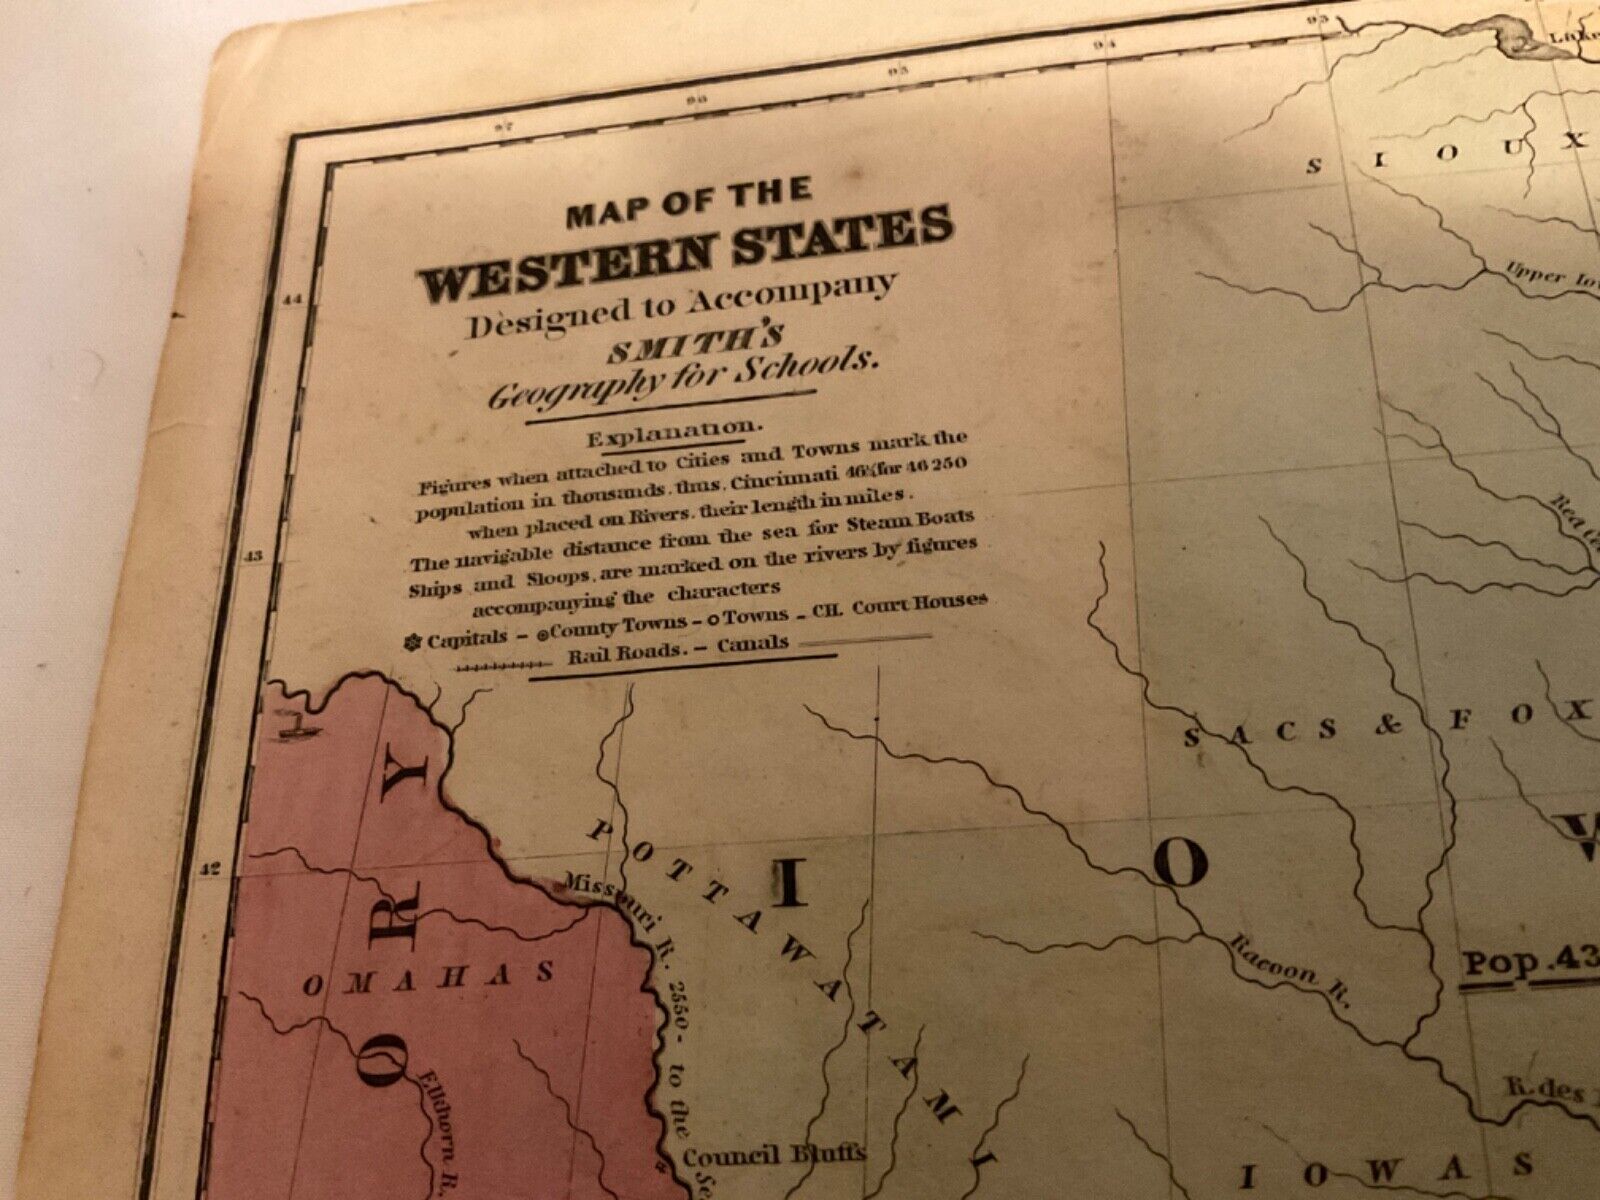 1594 ORIGINAL COLORED MAP OF THE WESTERN STATES 1839 PUBLISHED CAPITALS RAILROAD